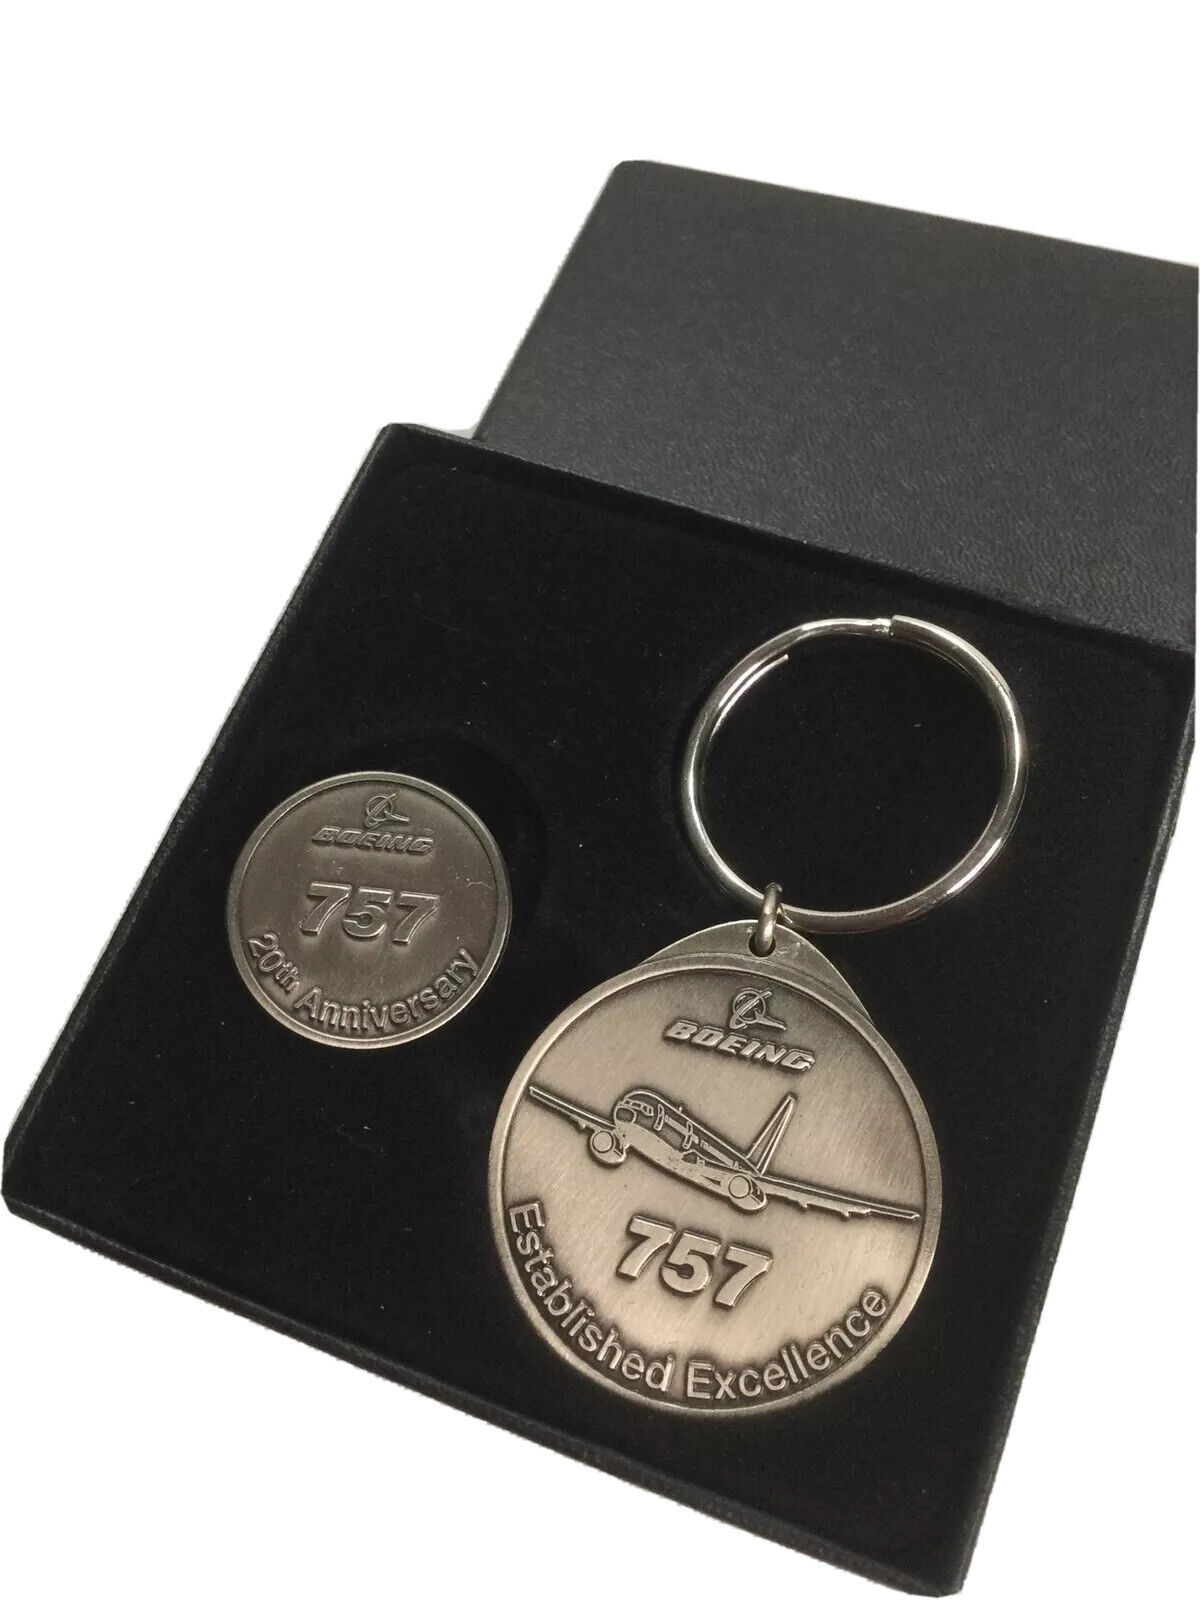 Boeing Key Chain & Pin The Boeing 757 20th Anniversary Dec 22 2002 First Deliver